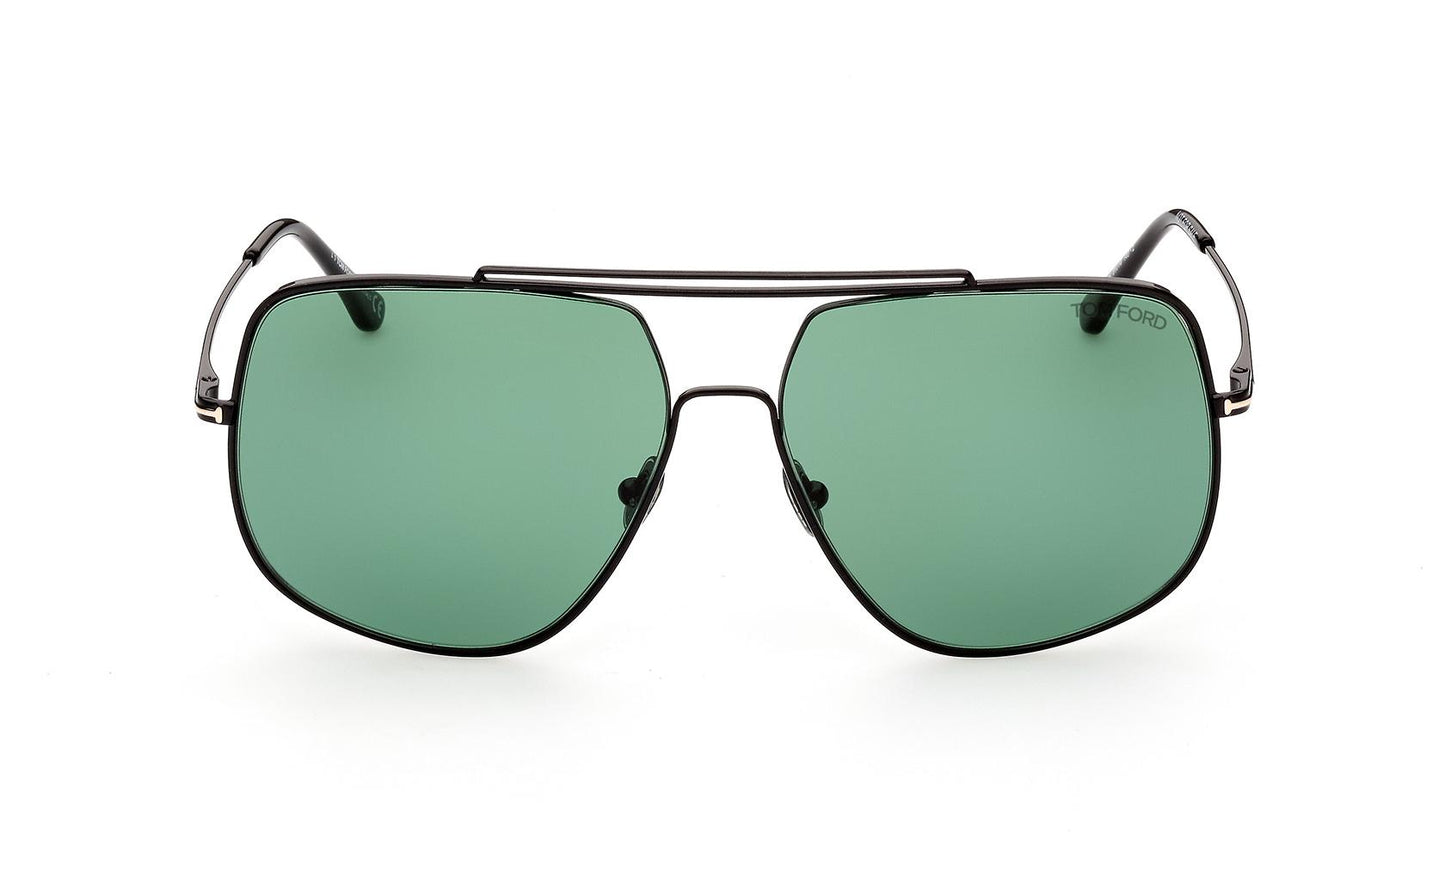 Load image into Gallery viewer, Tom Ford Liam Sunglasses FT0927 01N
